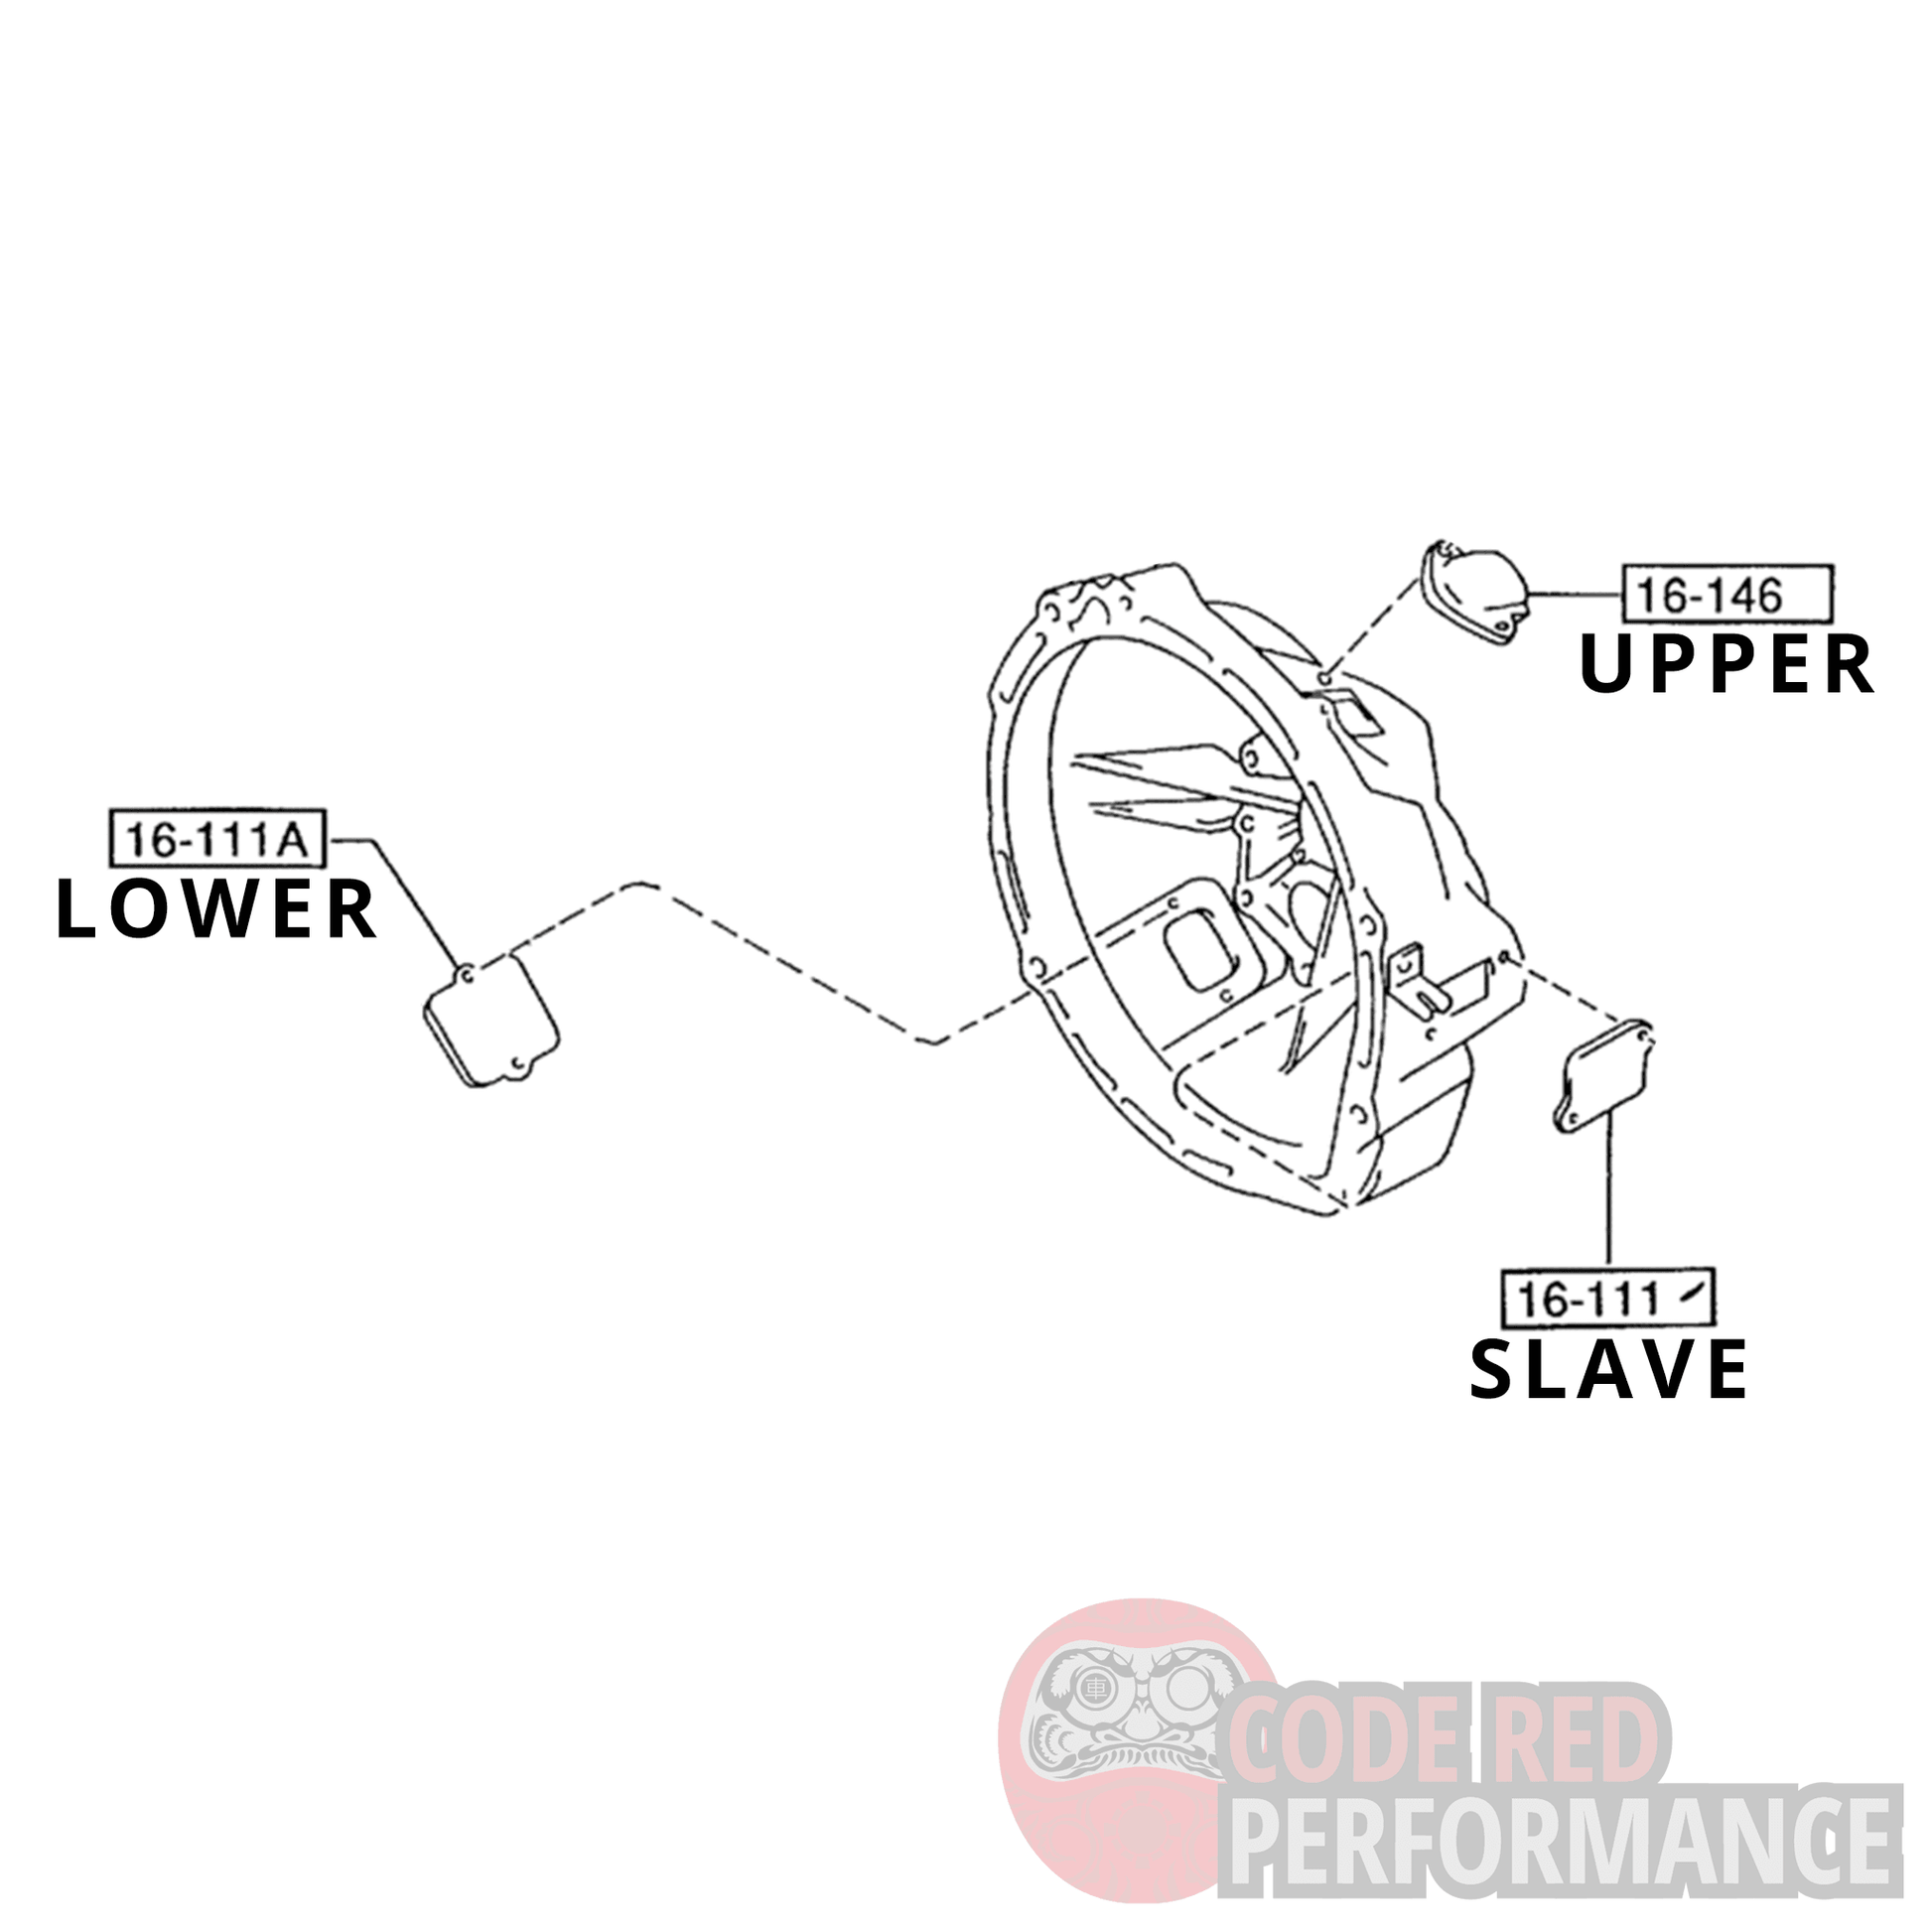 [FD3S RX7] Transmission Inspection Covers - CRP-TIC-FUL - Code Red Performance